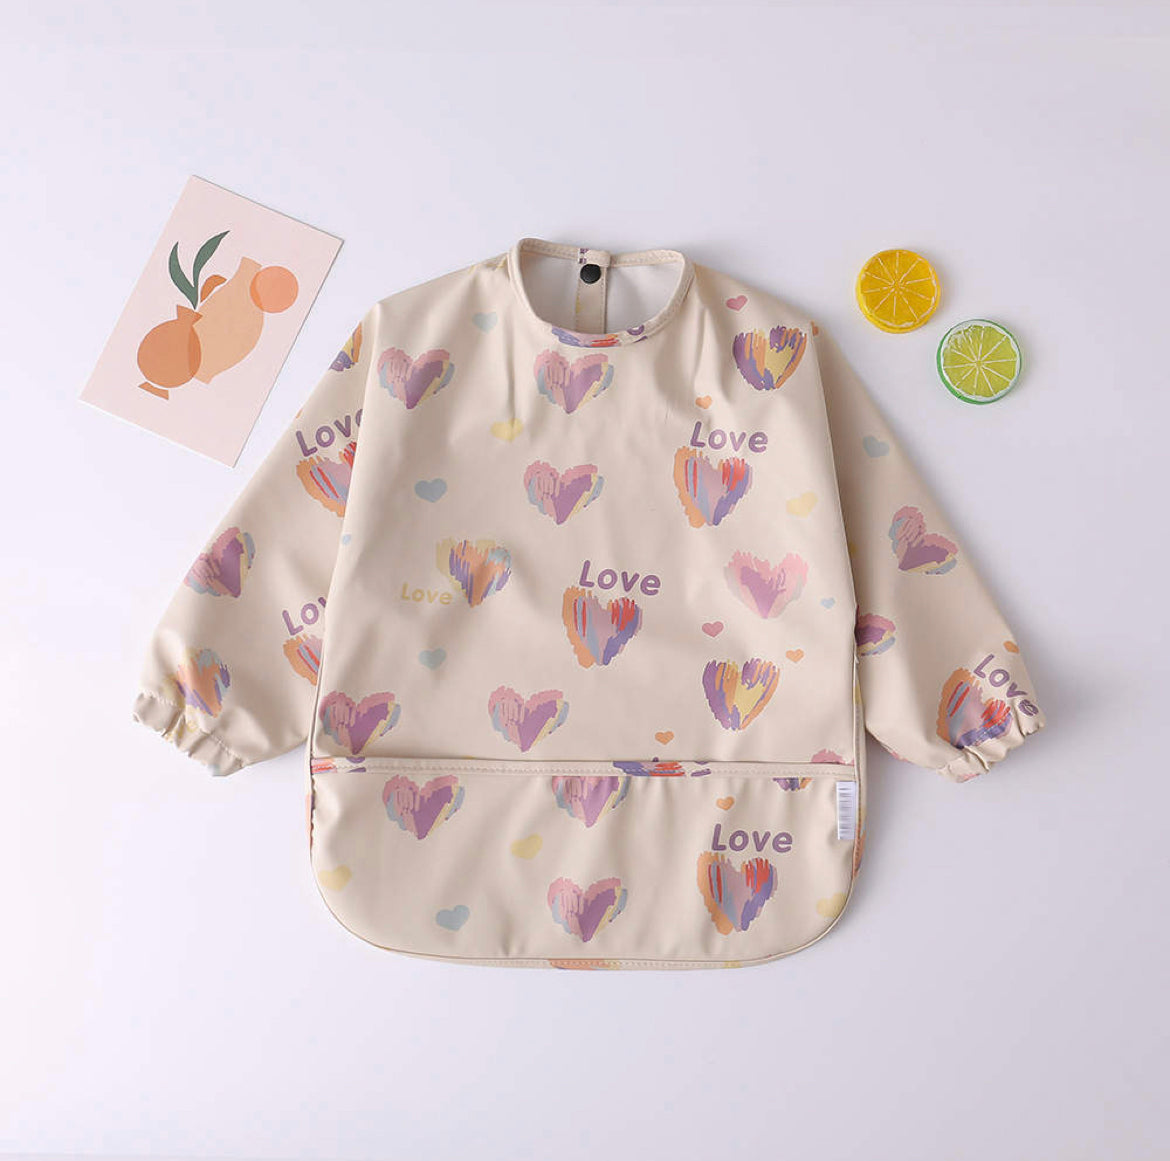 Get Ready for Mess-Free Mealtime with the Smock Bib for Your Baby